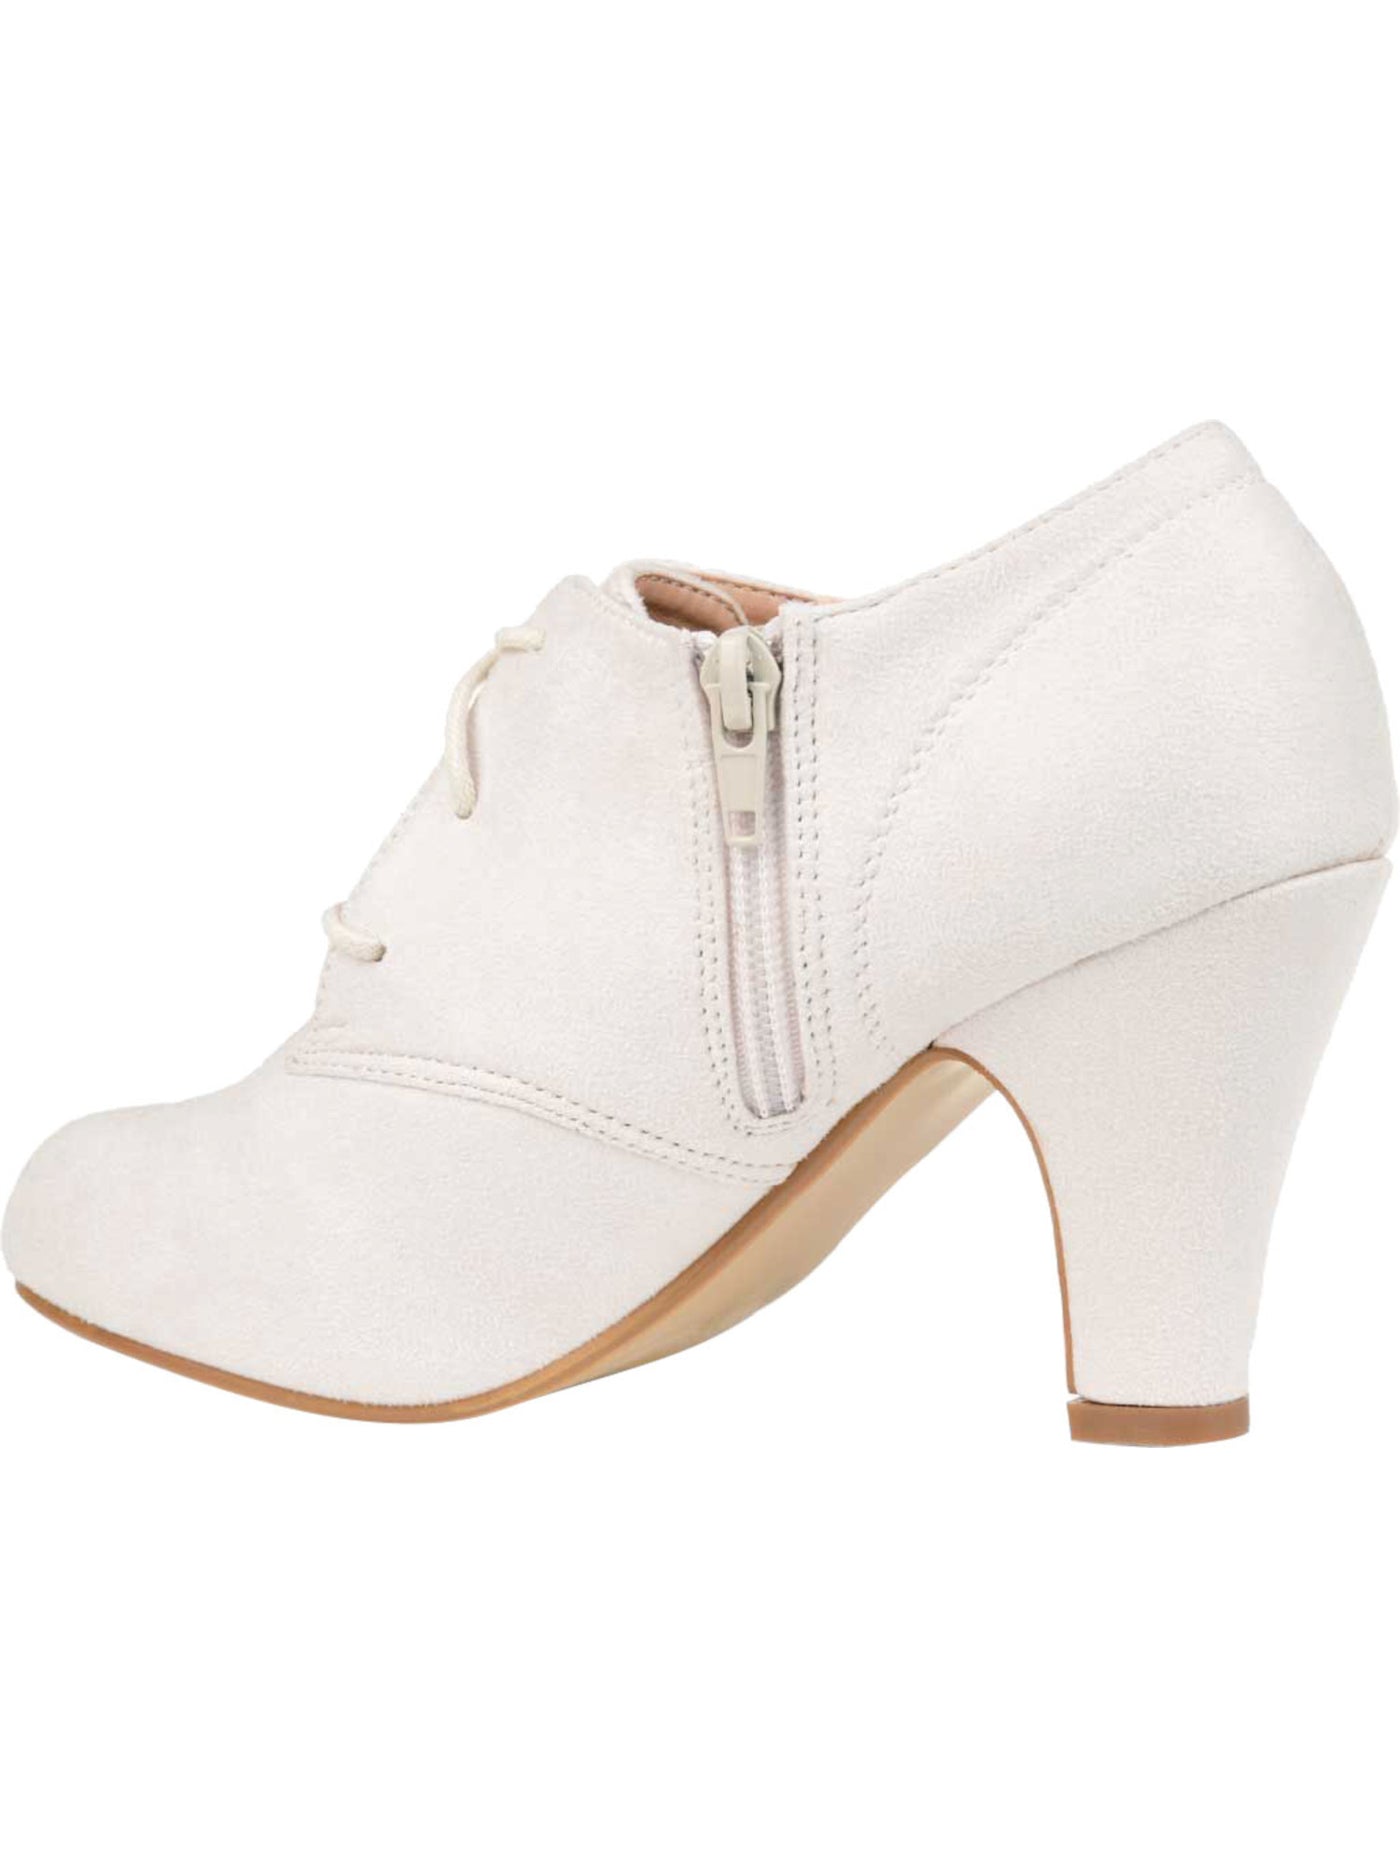 JOURNEE COLLECTION Womens Ivory Lace Padded Leona Round Toe Block Heel Zip-Up Shootie 8 WD